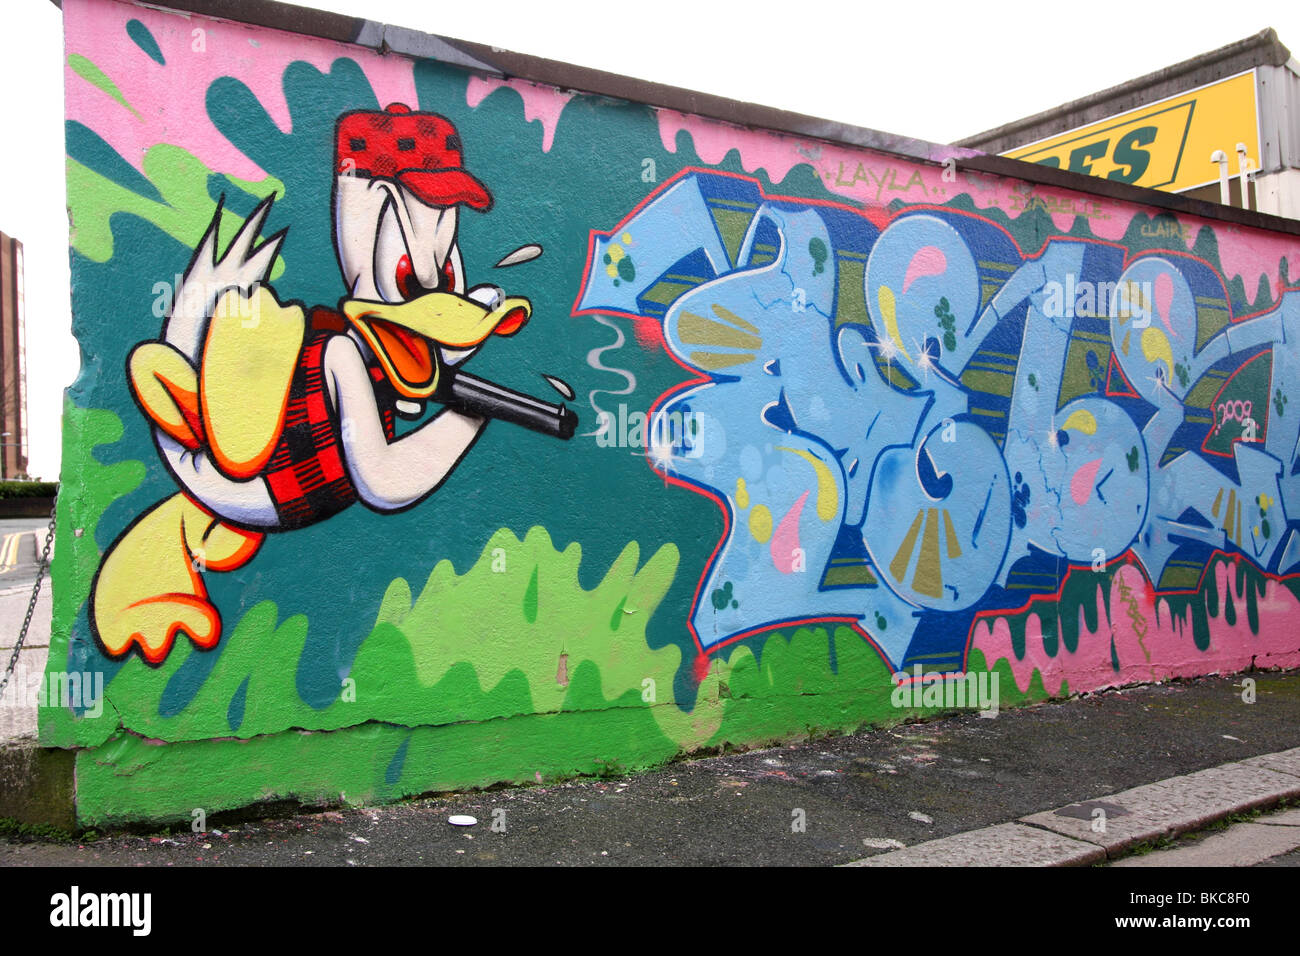 Donald Duck is an American cartoon character The Walt Disney Company as seen in the graffiti character painted on this wall-side Stock Photo